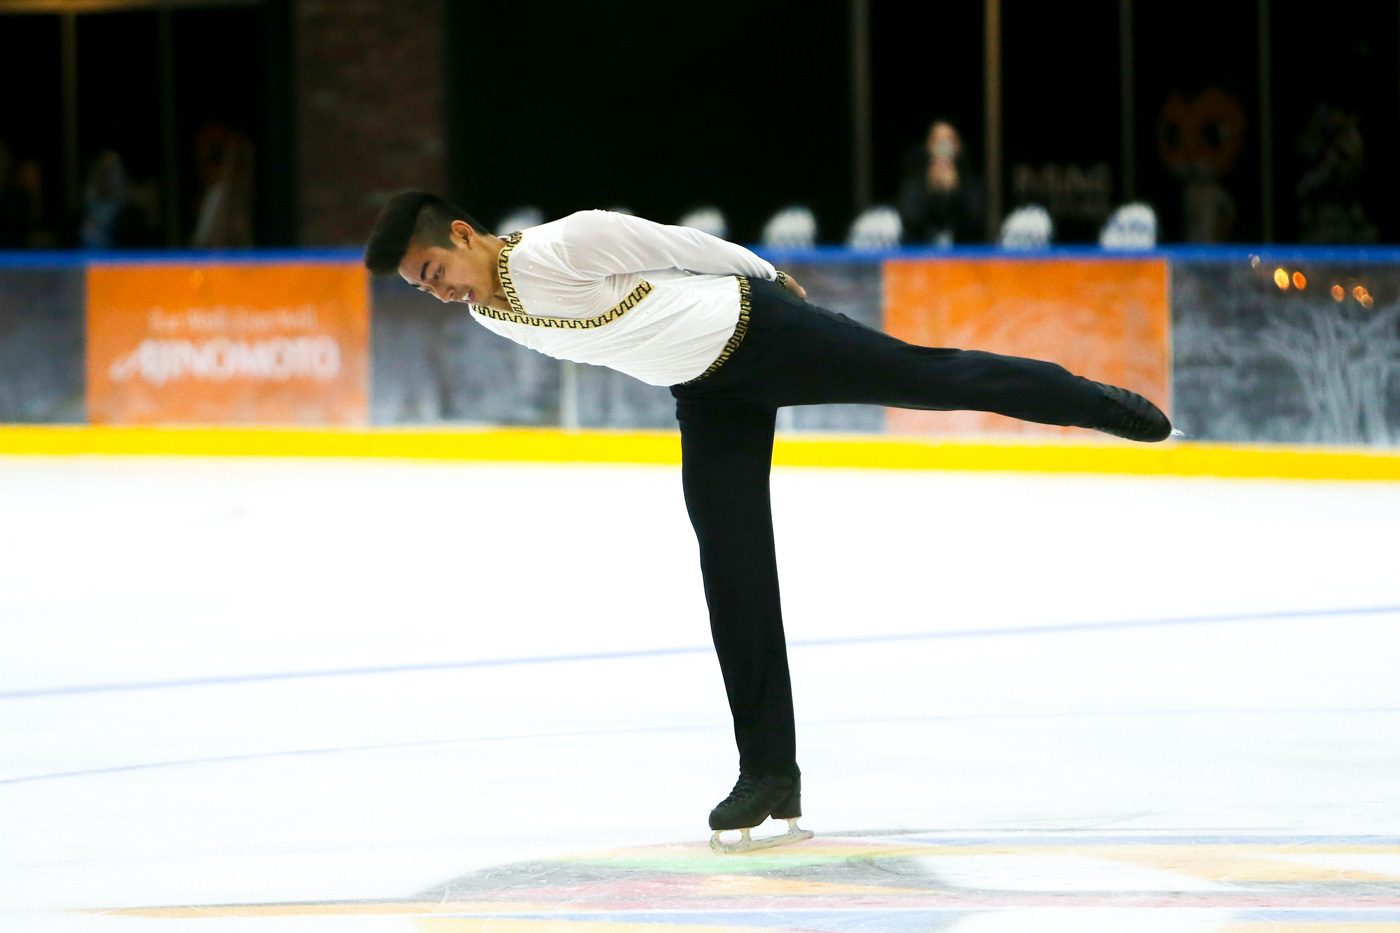 PH’s Michael Martinez to compete in 2018 Winter Olympics